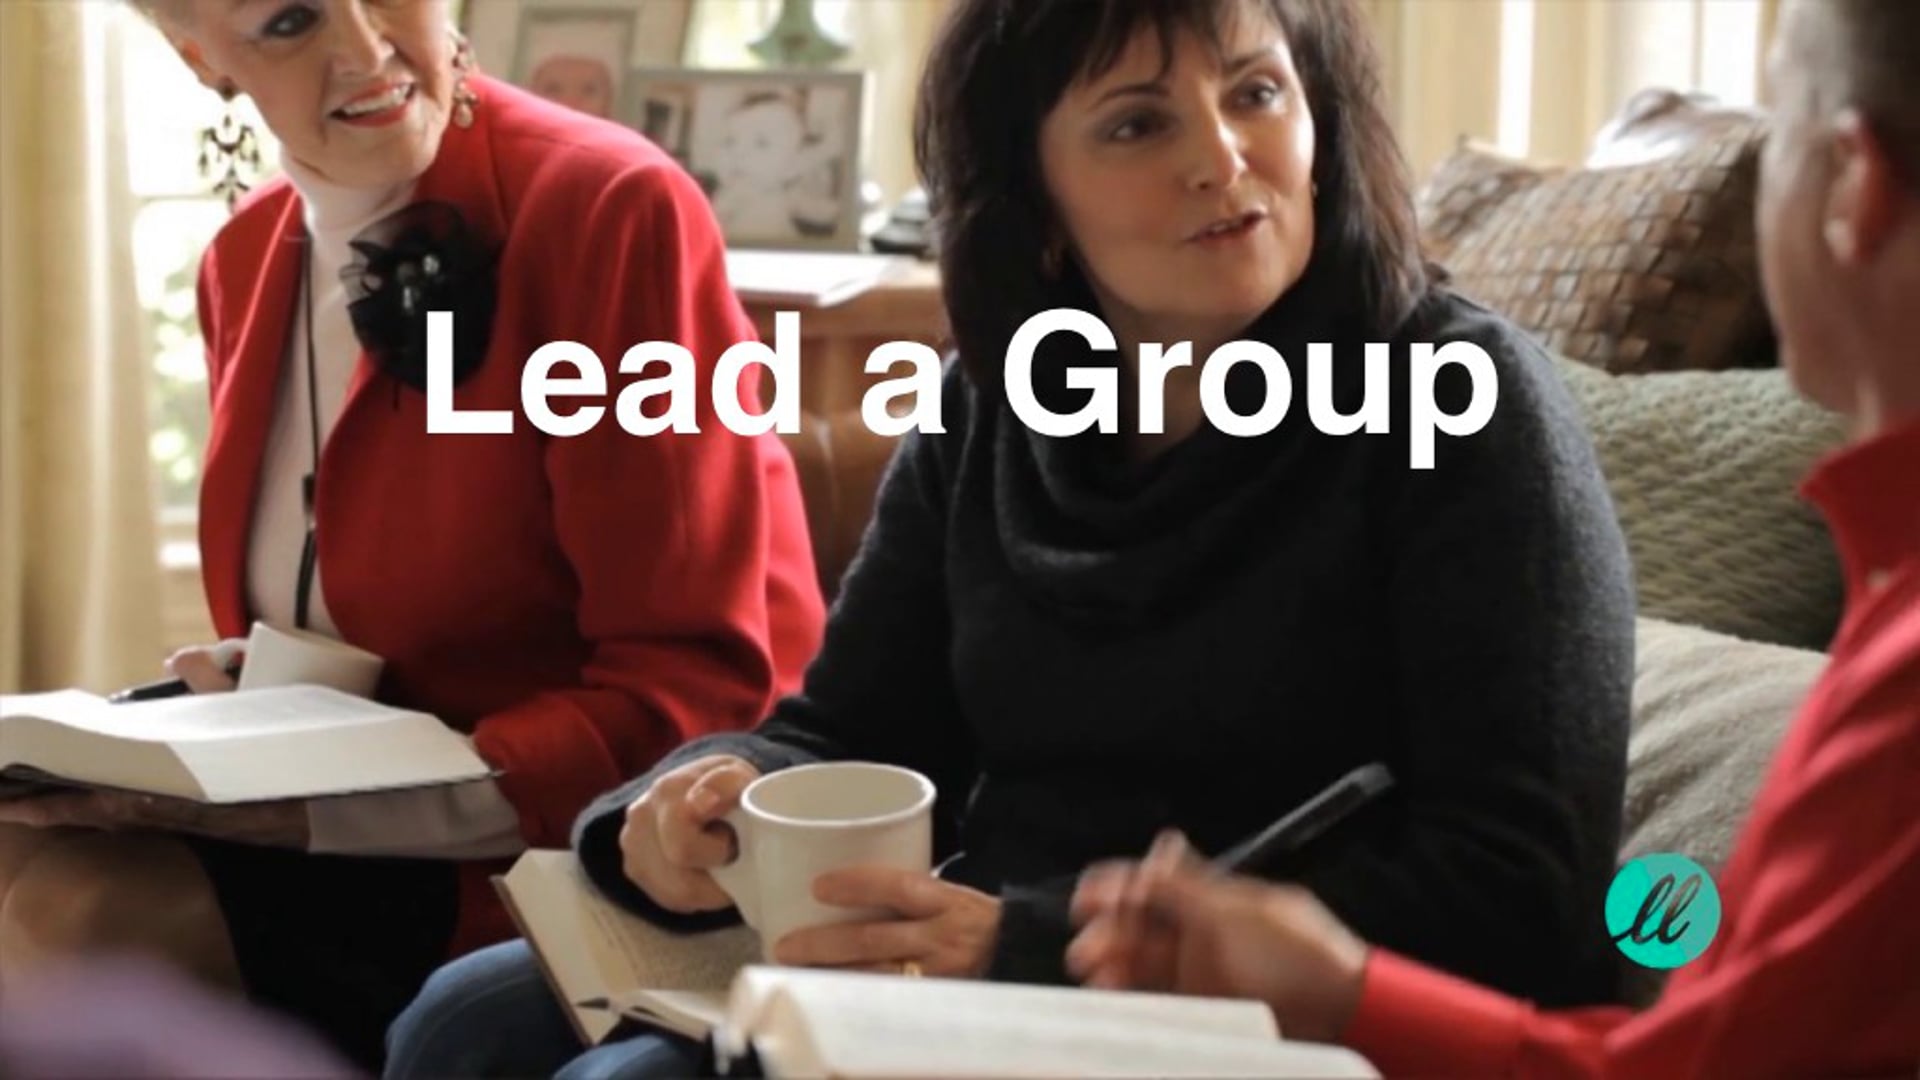 PRACTICAL SKILLS TO LEAD A GROUP